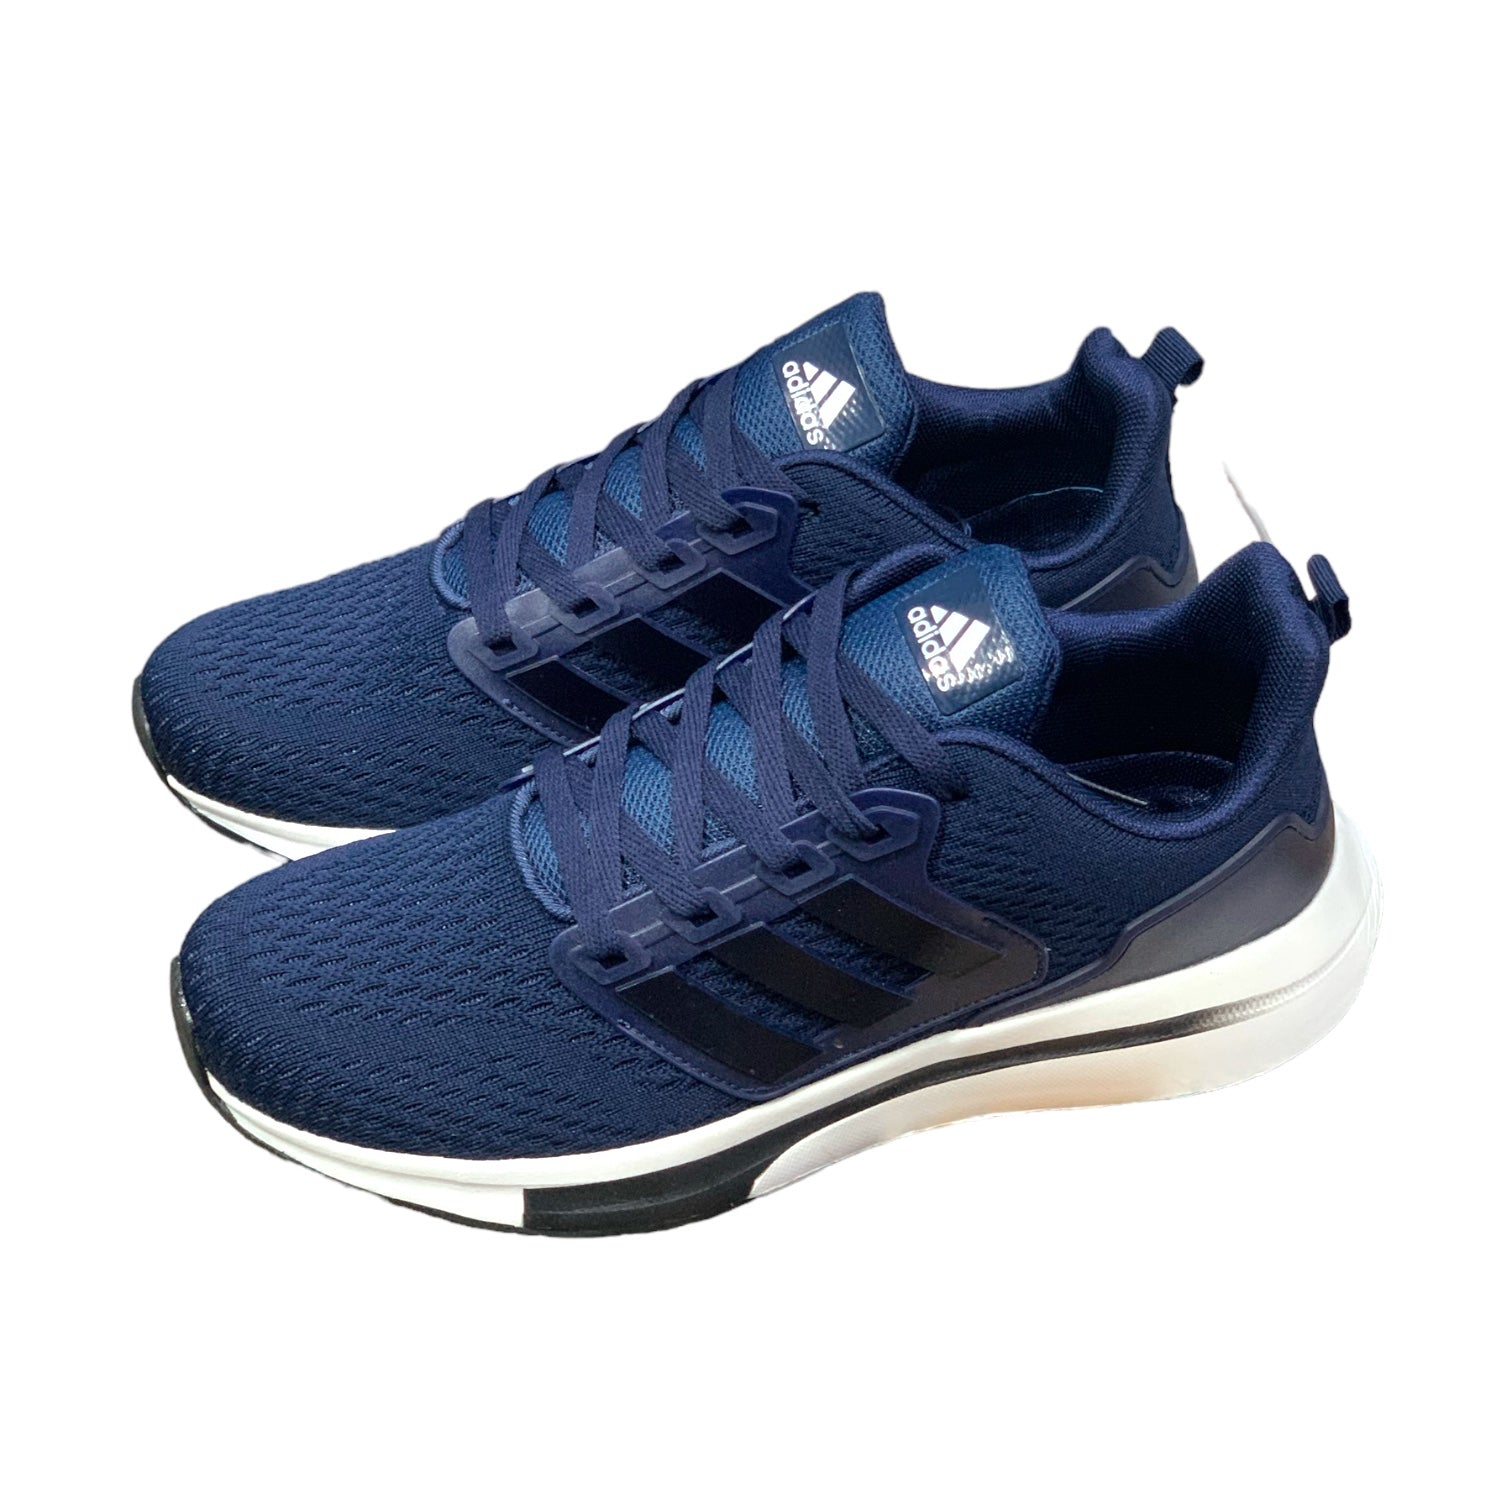 Adidas Equity 21 Navy Blue